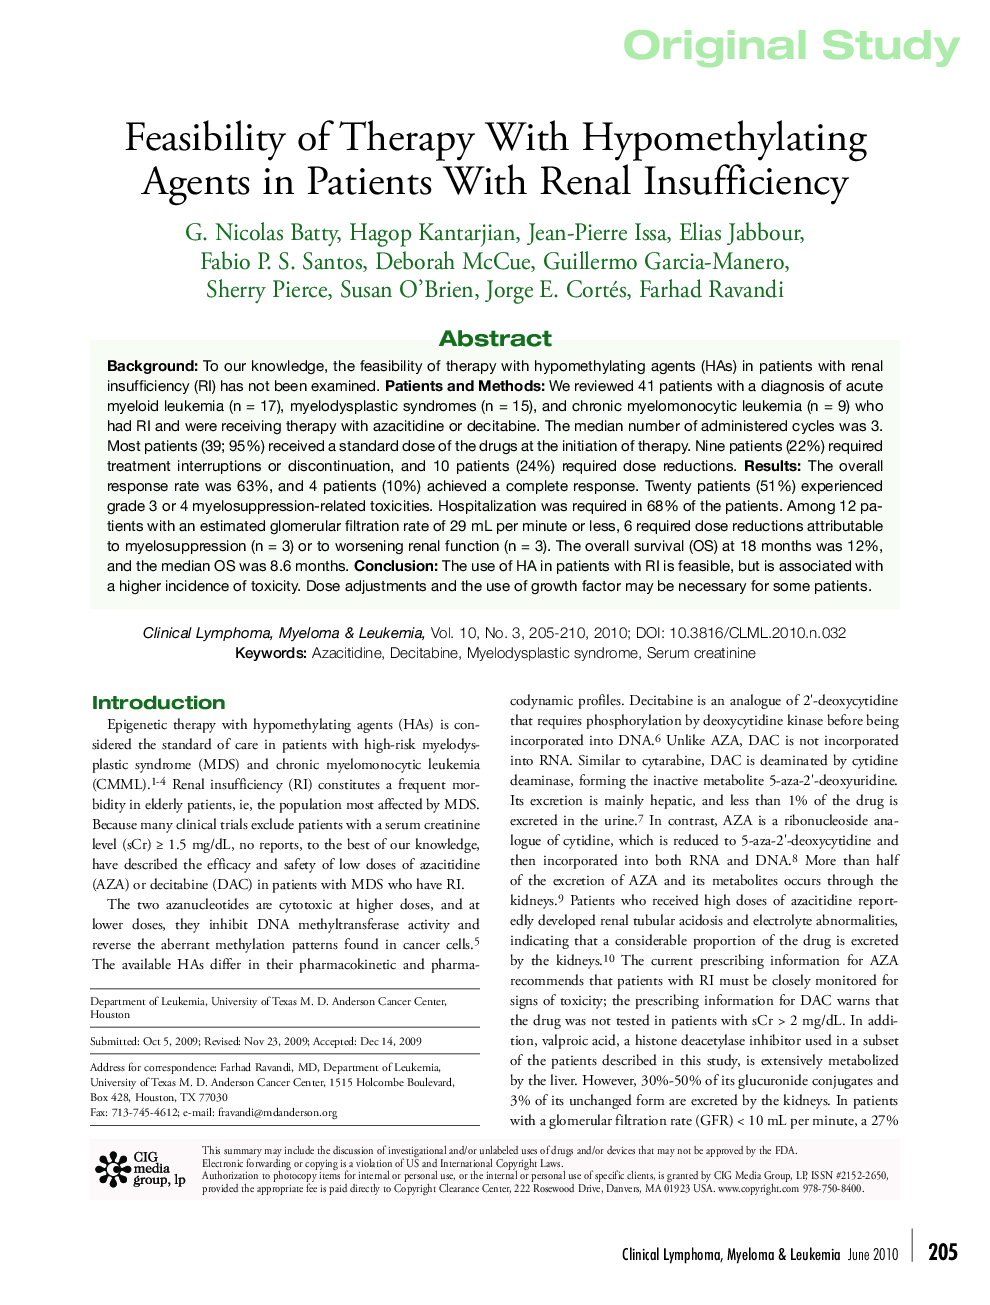 Feasibility of Therapy With Hypomethylating Agents in Patients With Renal Insufficiency 